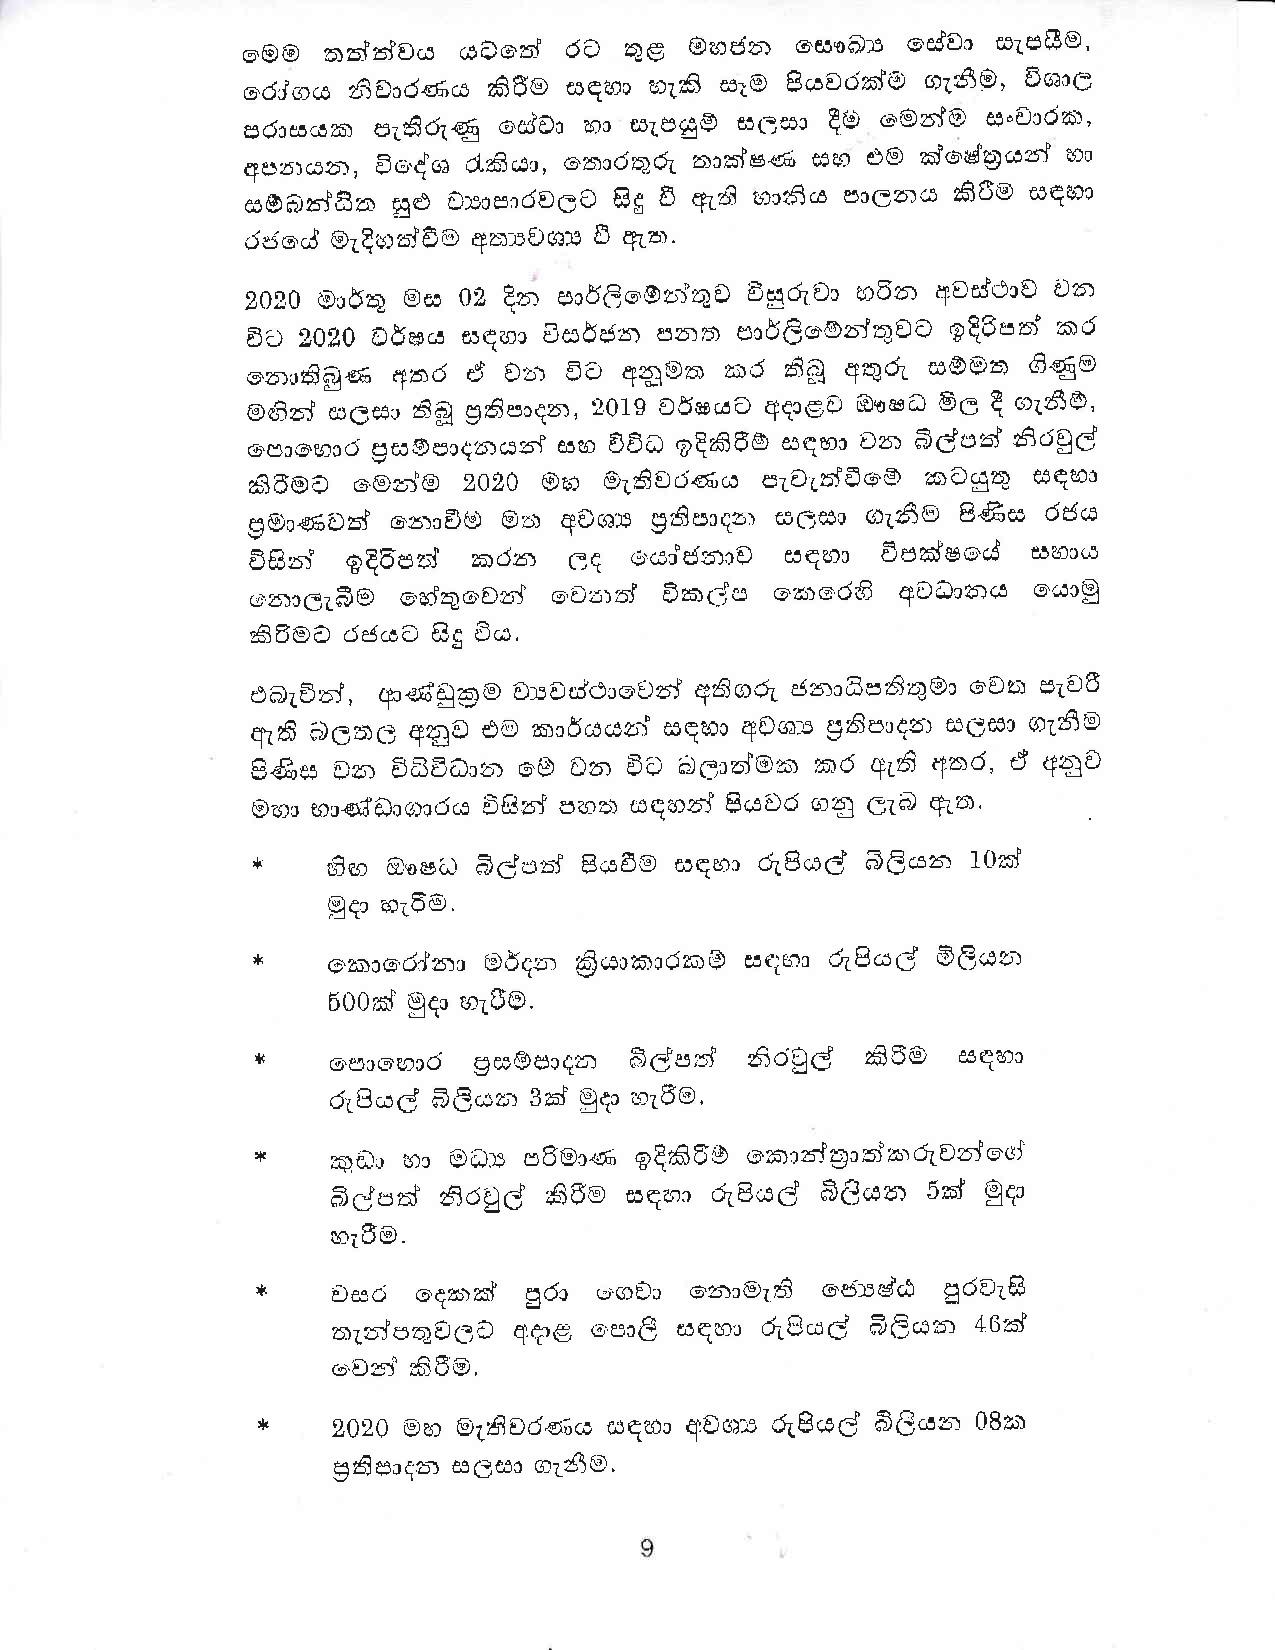 Cabinet Decision on sinhala 18.03.2020 page 009